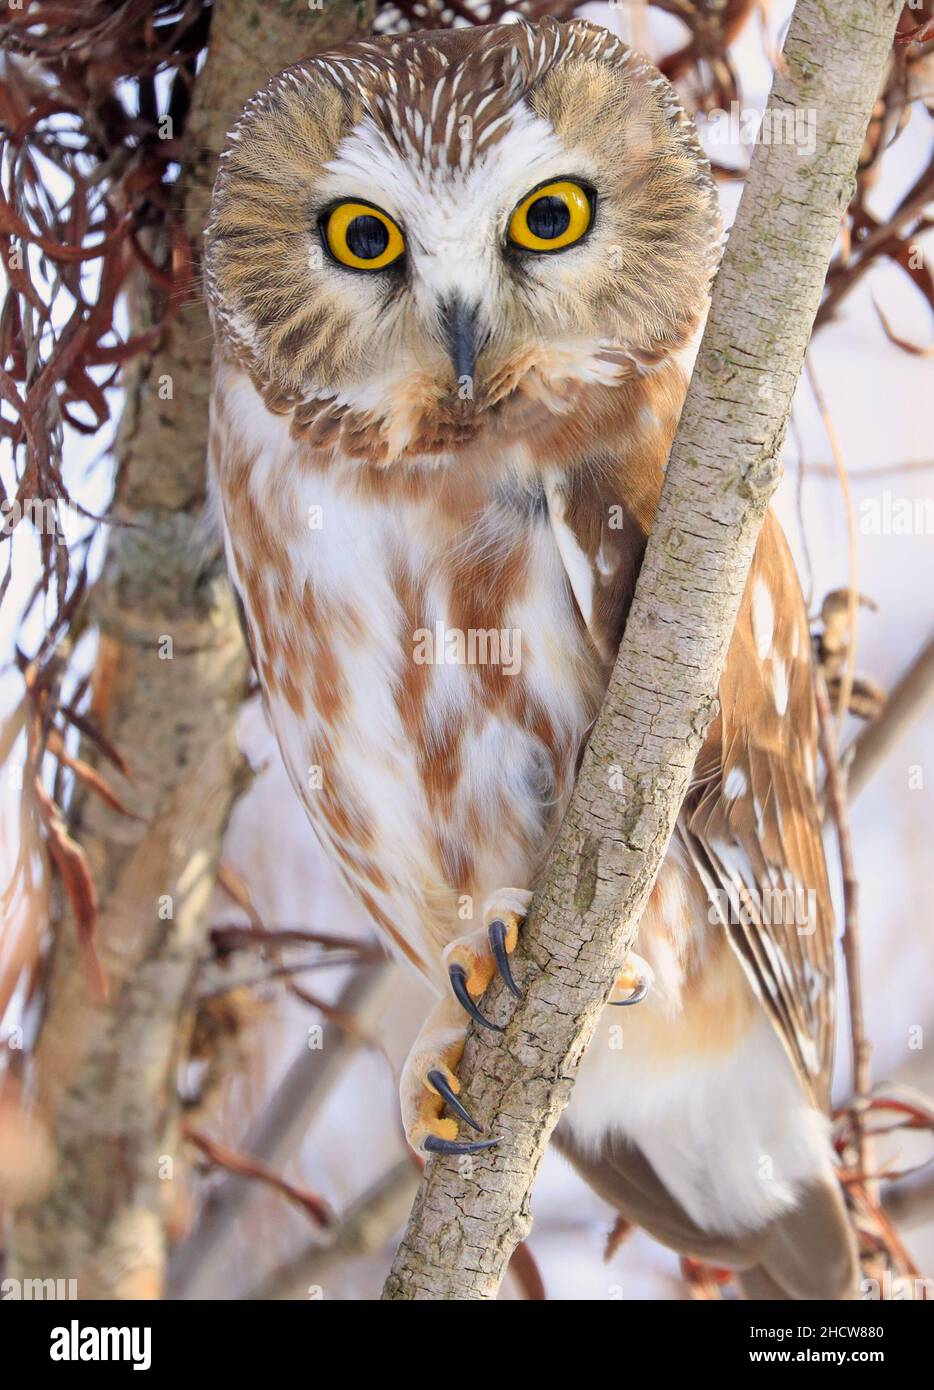 Northern Saw-whet Owl standing on a tree branch, Quebec, Canada Stock Photo